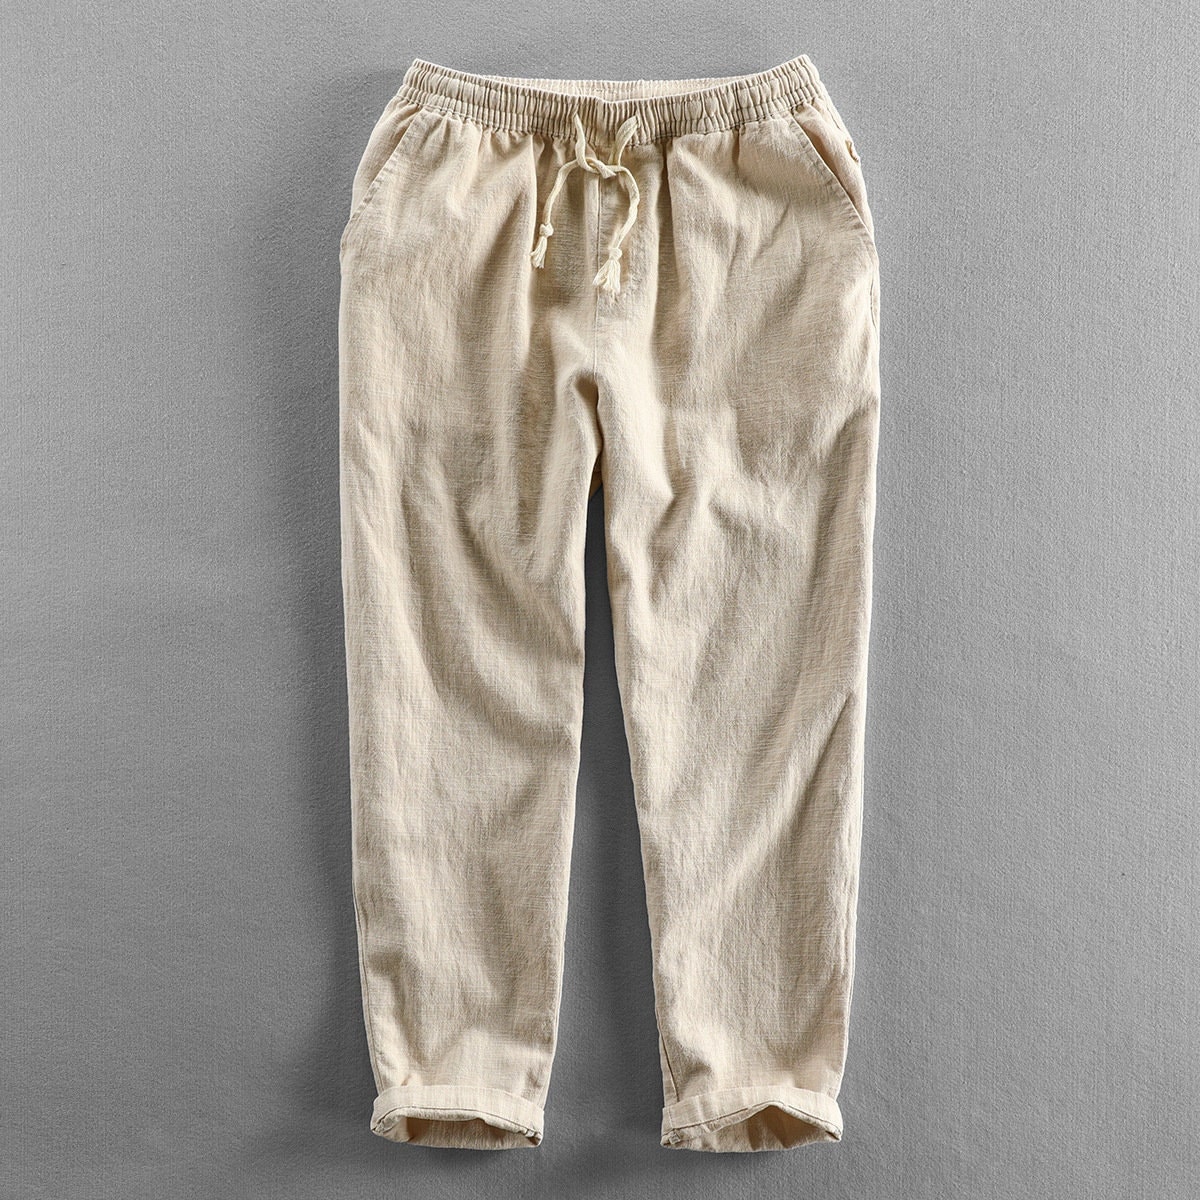 Jeans, Pants & Shorts On Sale | Anthropologie